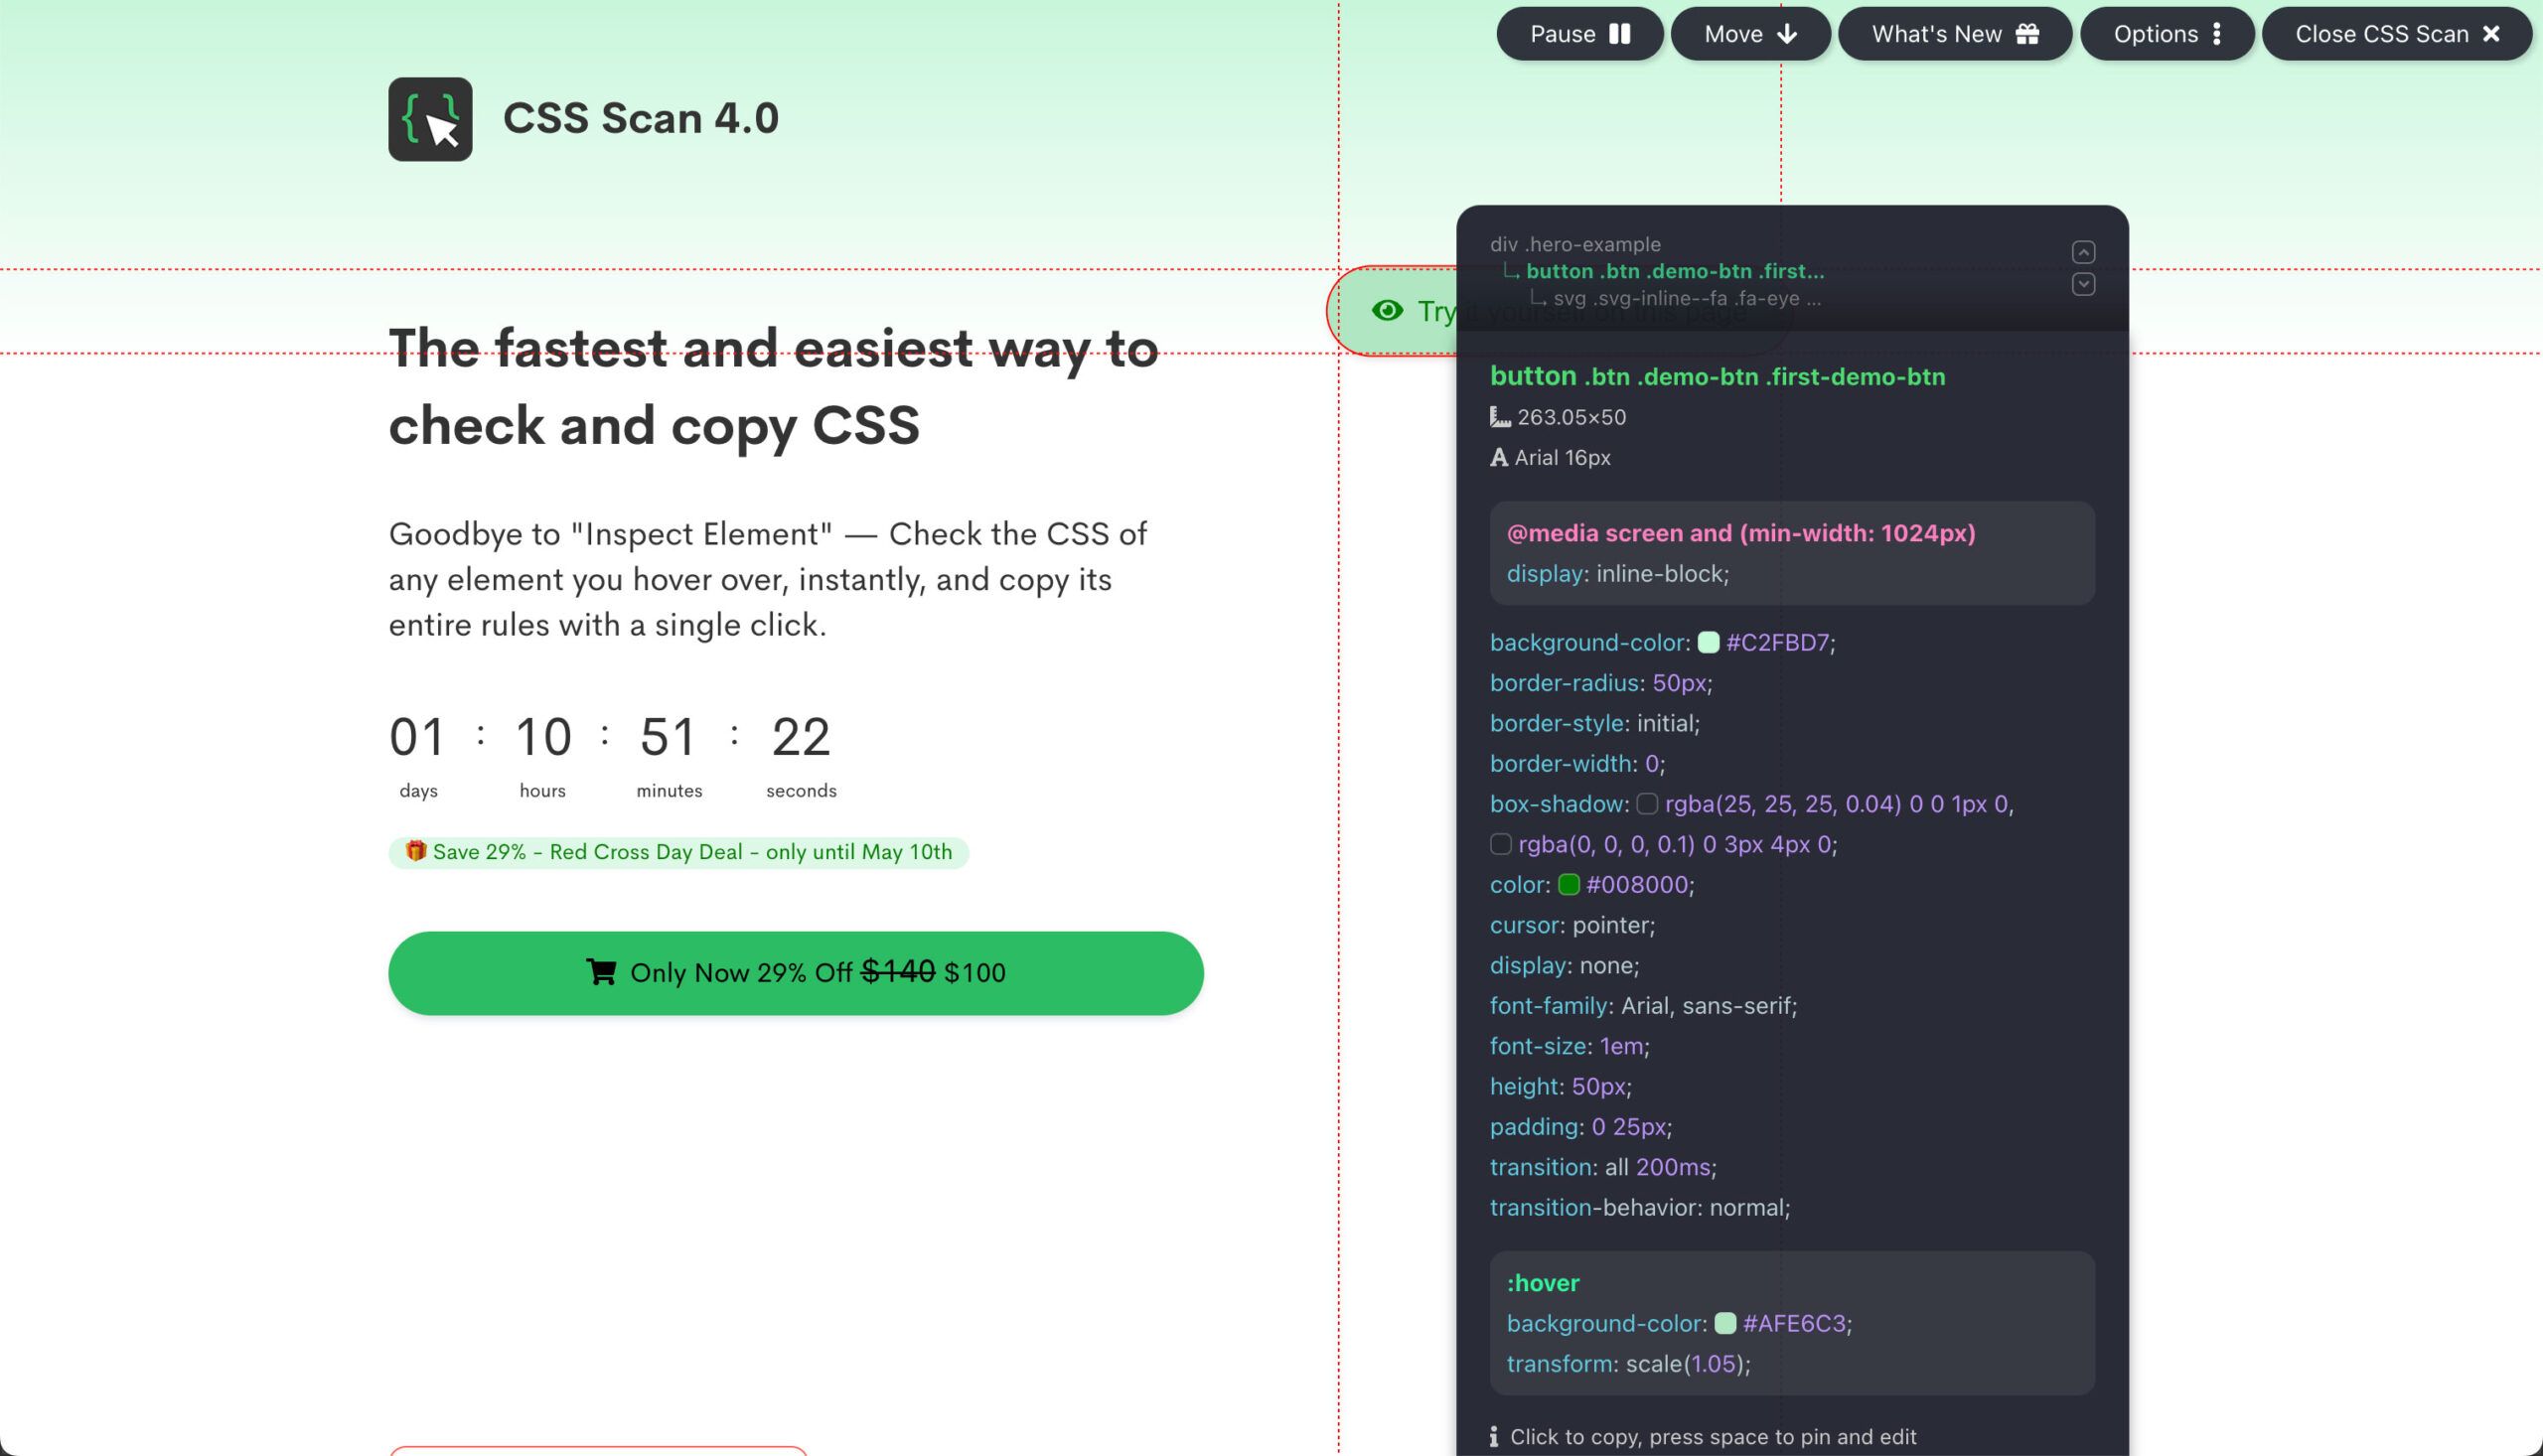 [CSS Scan] Visual CSS editor (chrome extention) v4.0.4